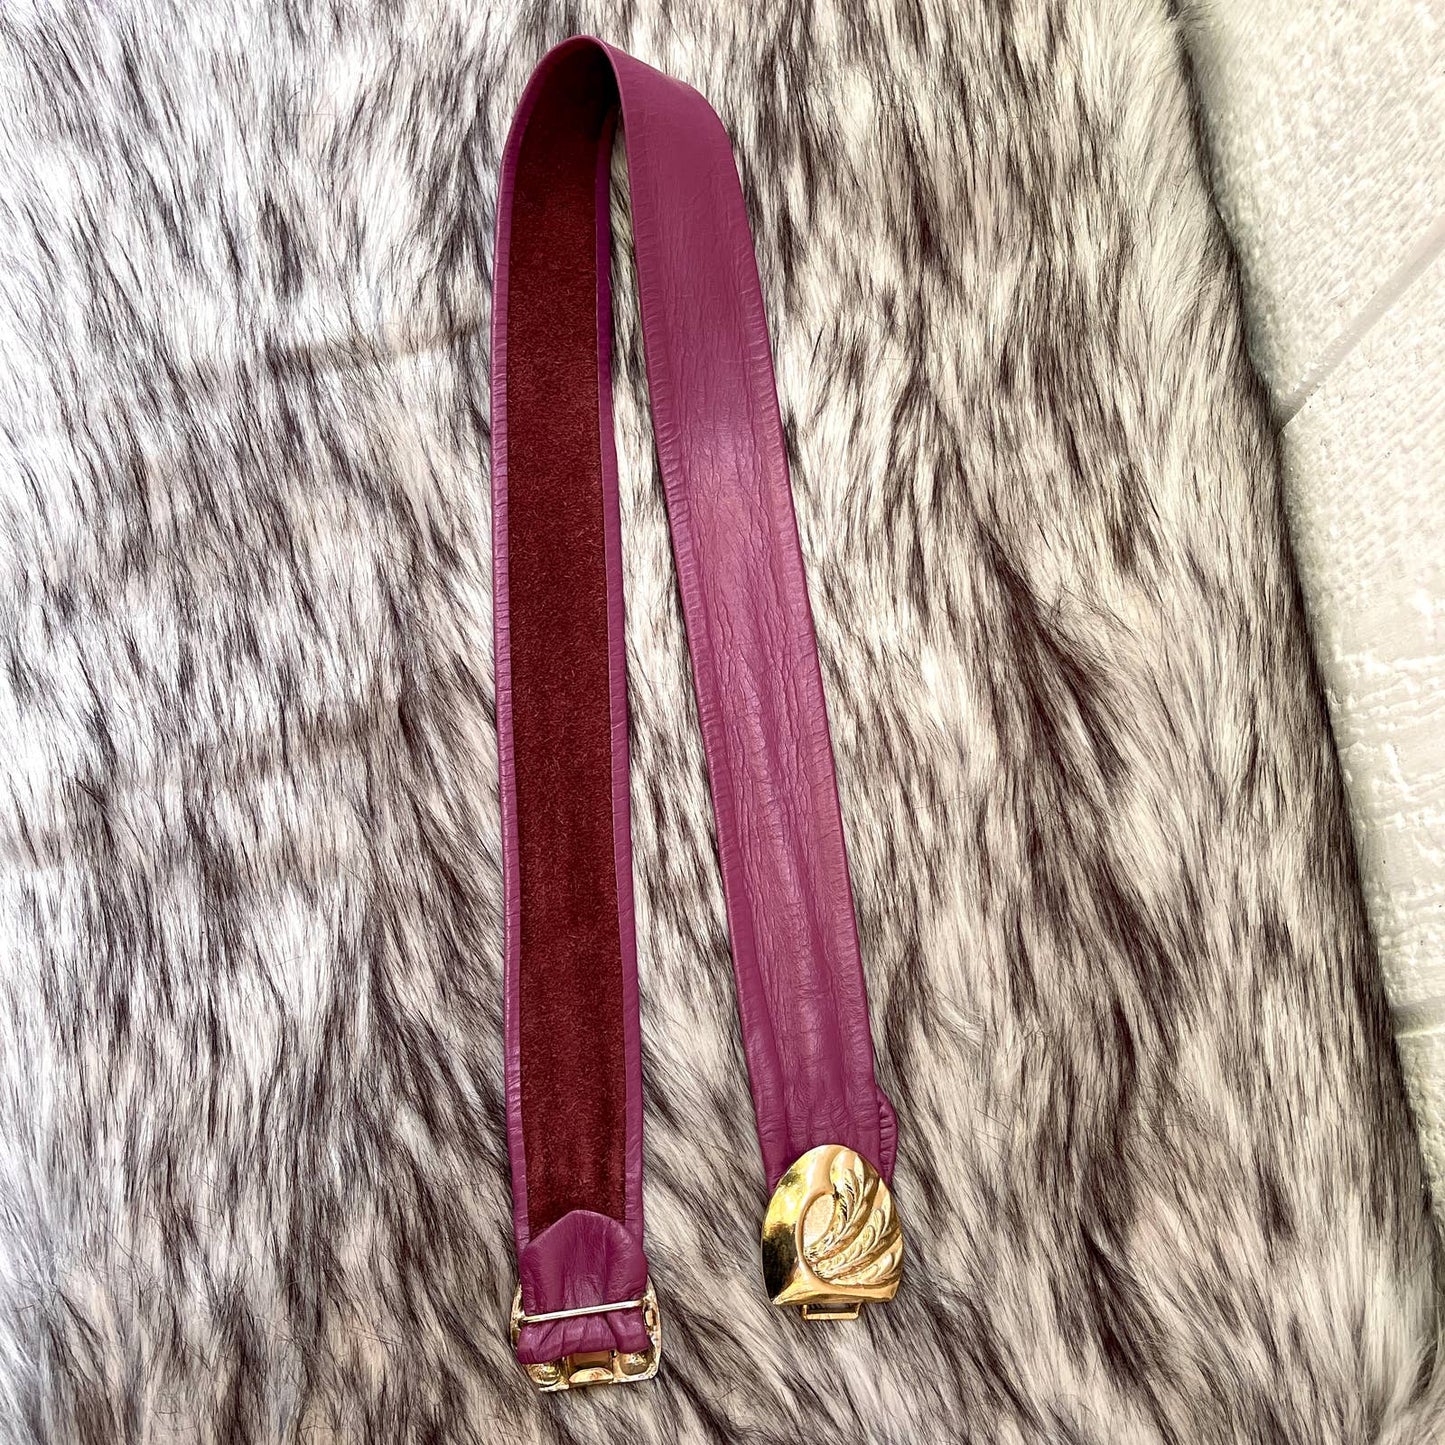 Vintage 80s Purple Leather Belt Gold Wheat Buckle Metal Hooked Size S M